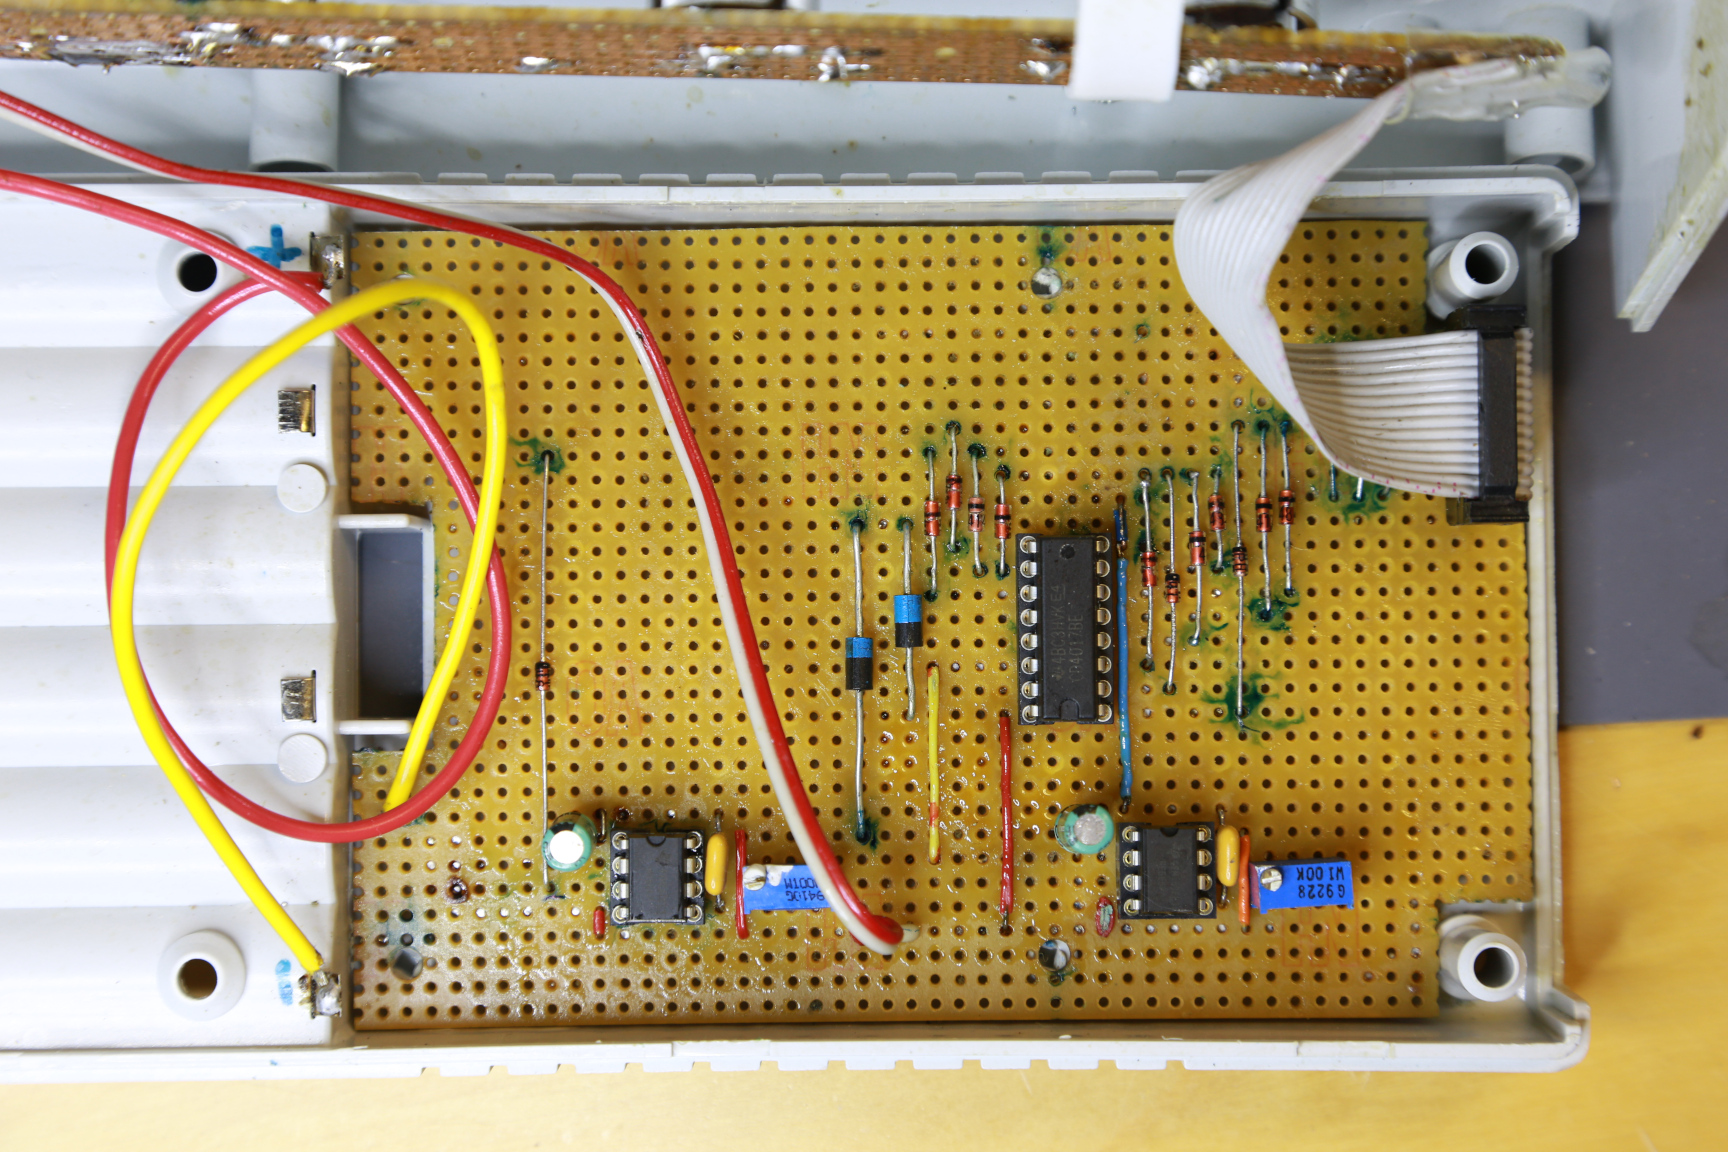 All components on a perfoboard